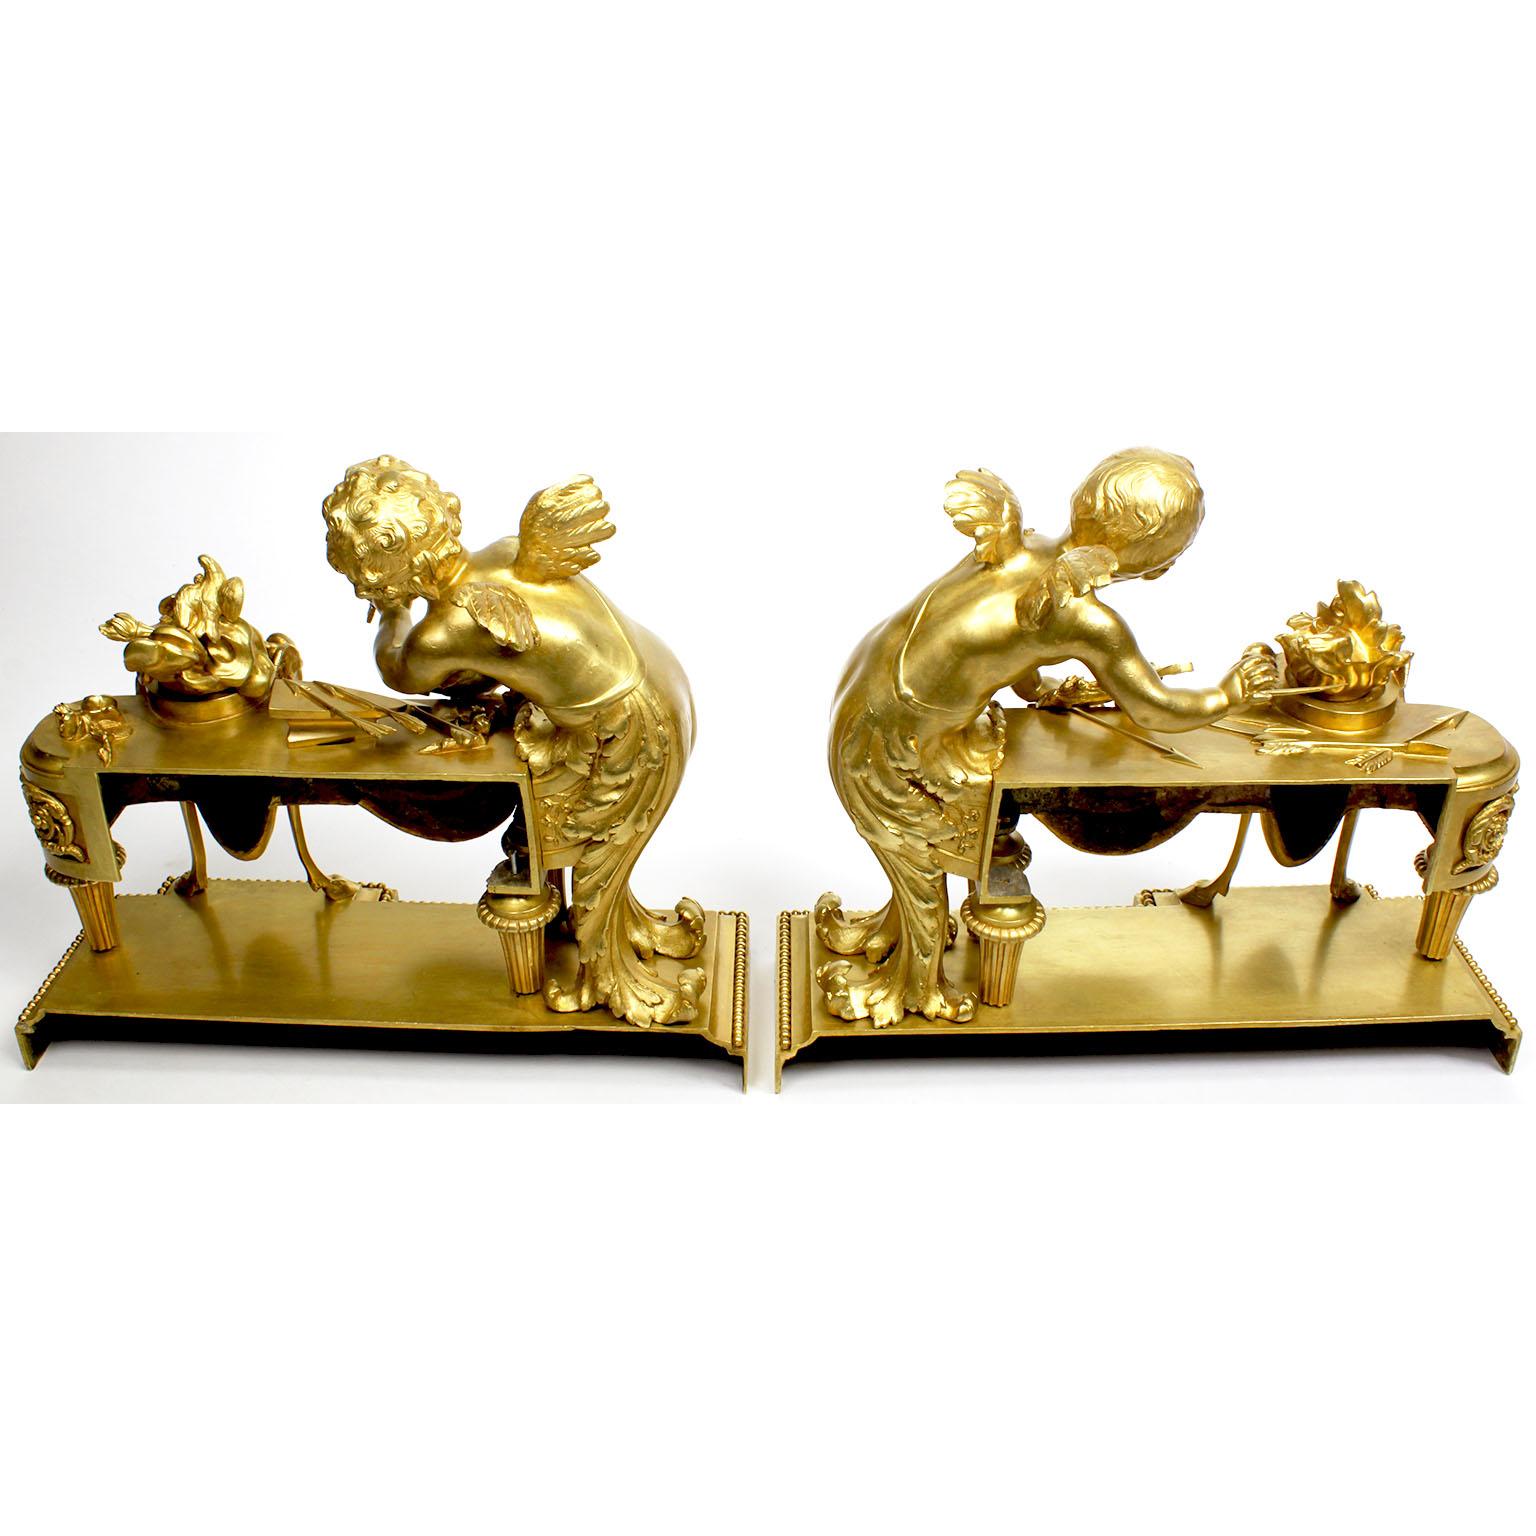 Pair of French 19th Century Louis XV Style Cherub Gilt-Bronze Chenets Andirons For Sale 15